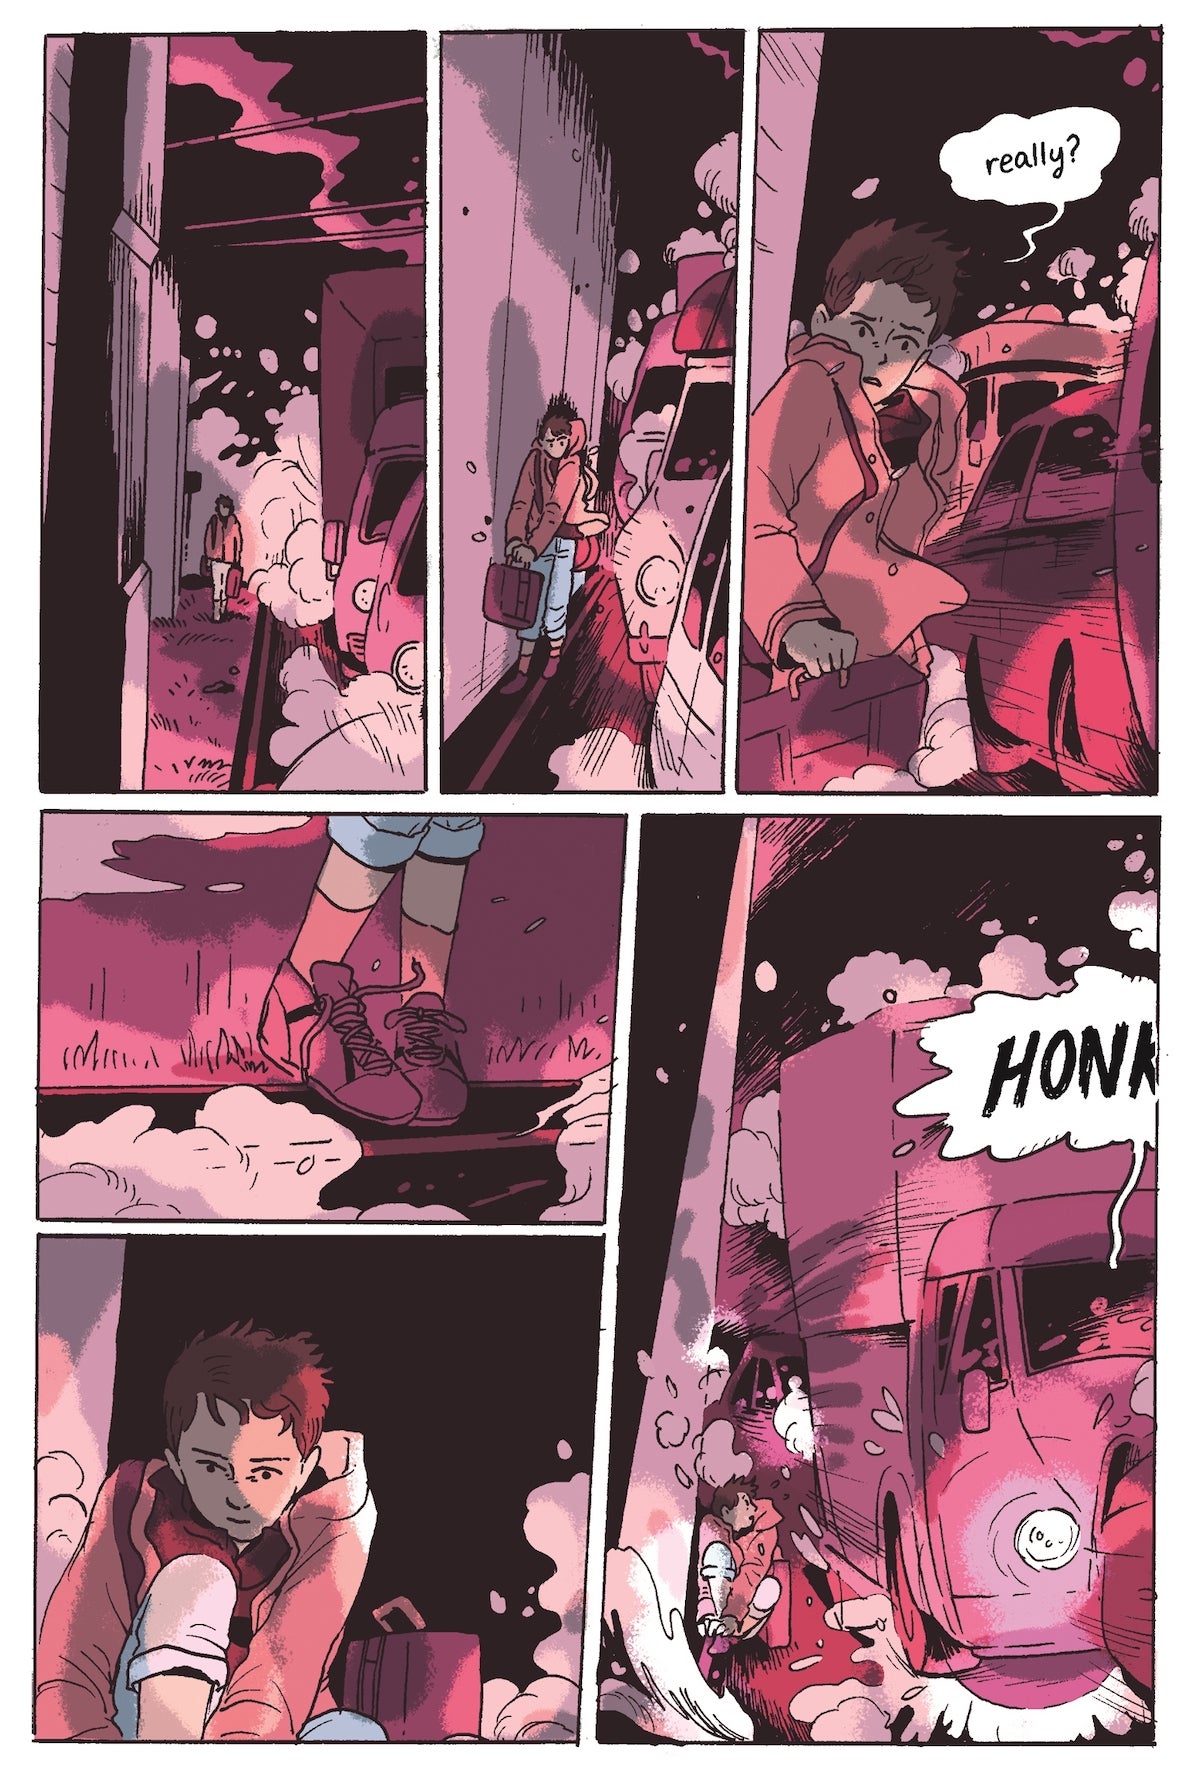 Are You Listening excerpt by Tillie Walden